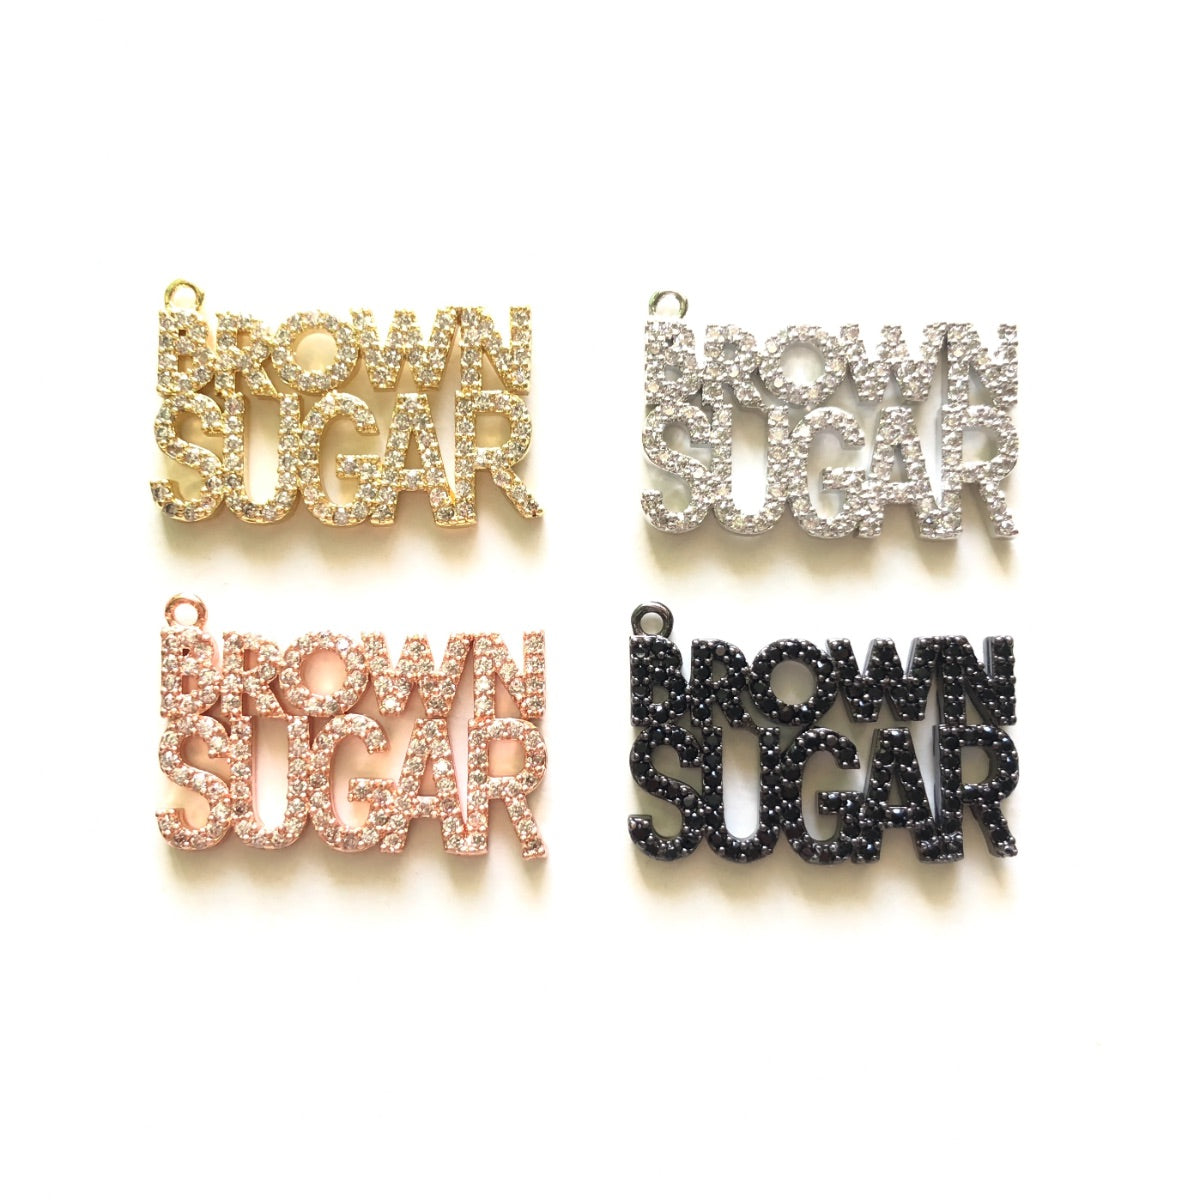 10pcs/lot 26.5*18mm CZ Paved Brown Sugar Charms CZ Paved Charms On Sale Words & Quotes Charms Beads Beyond